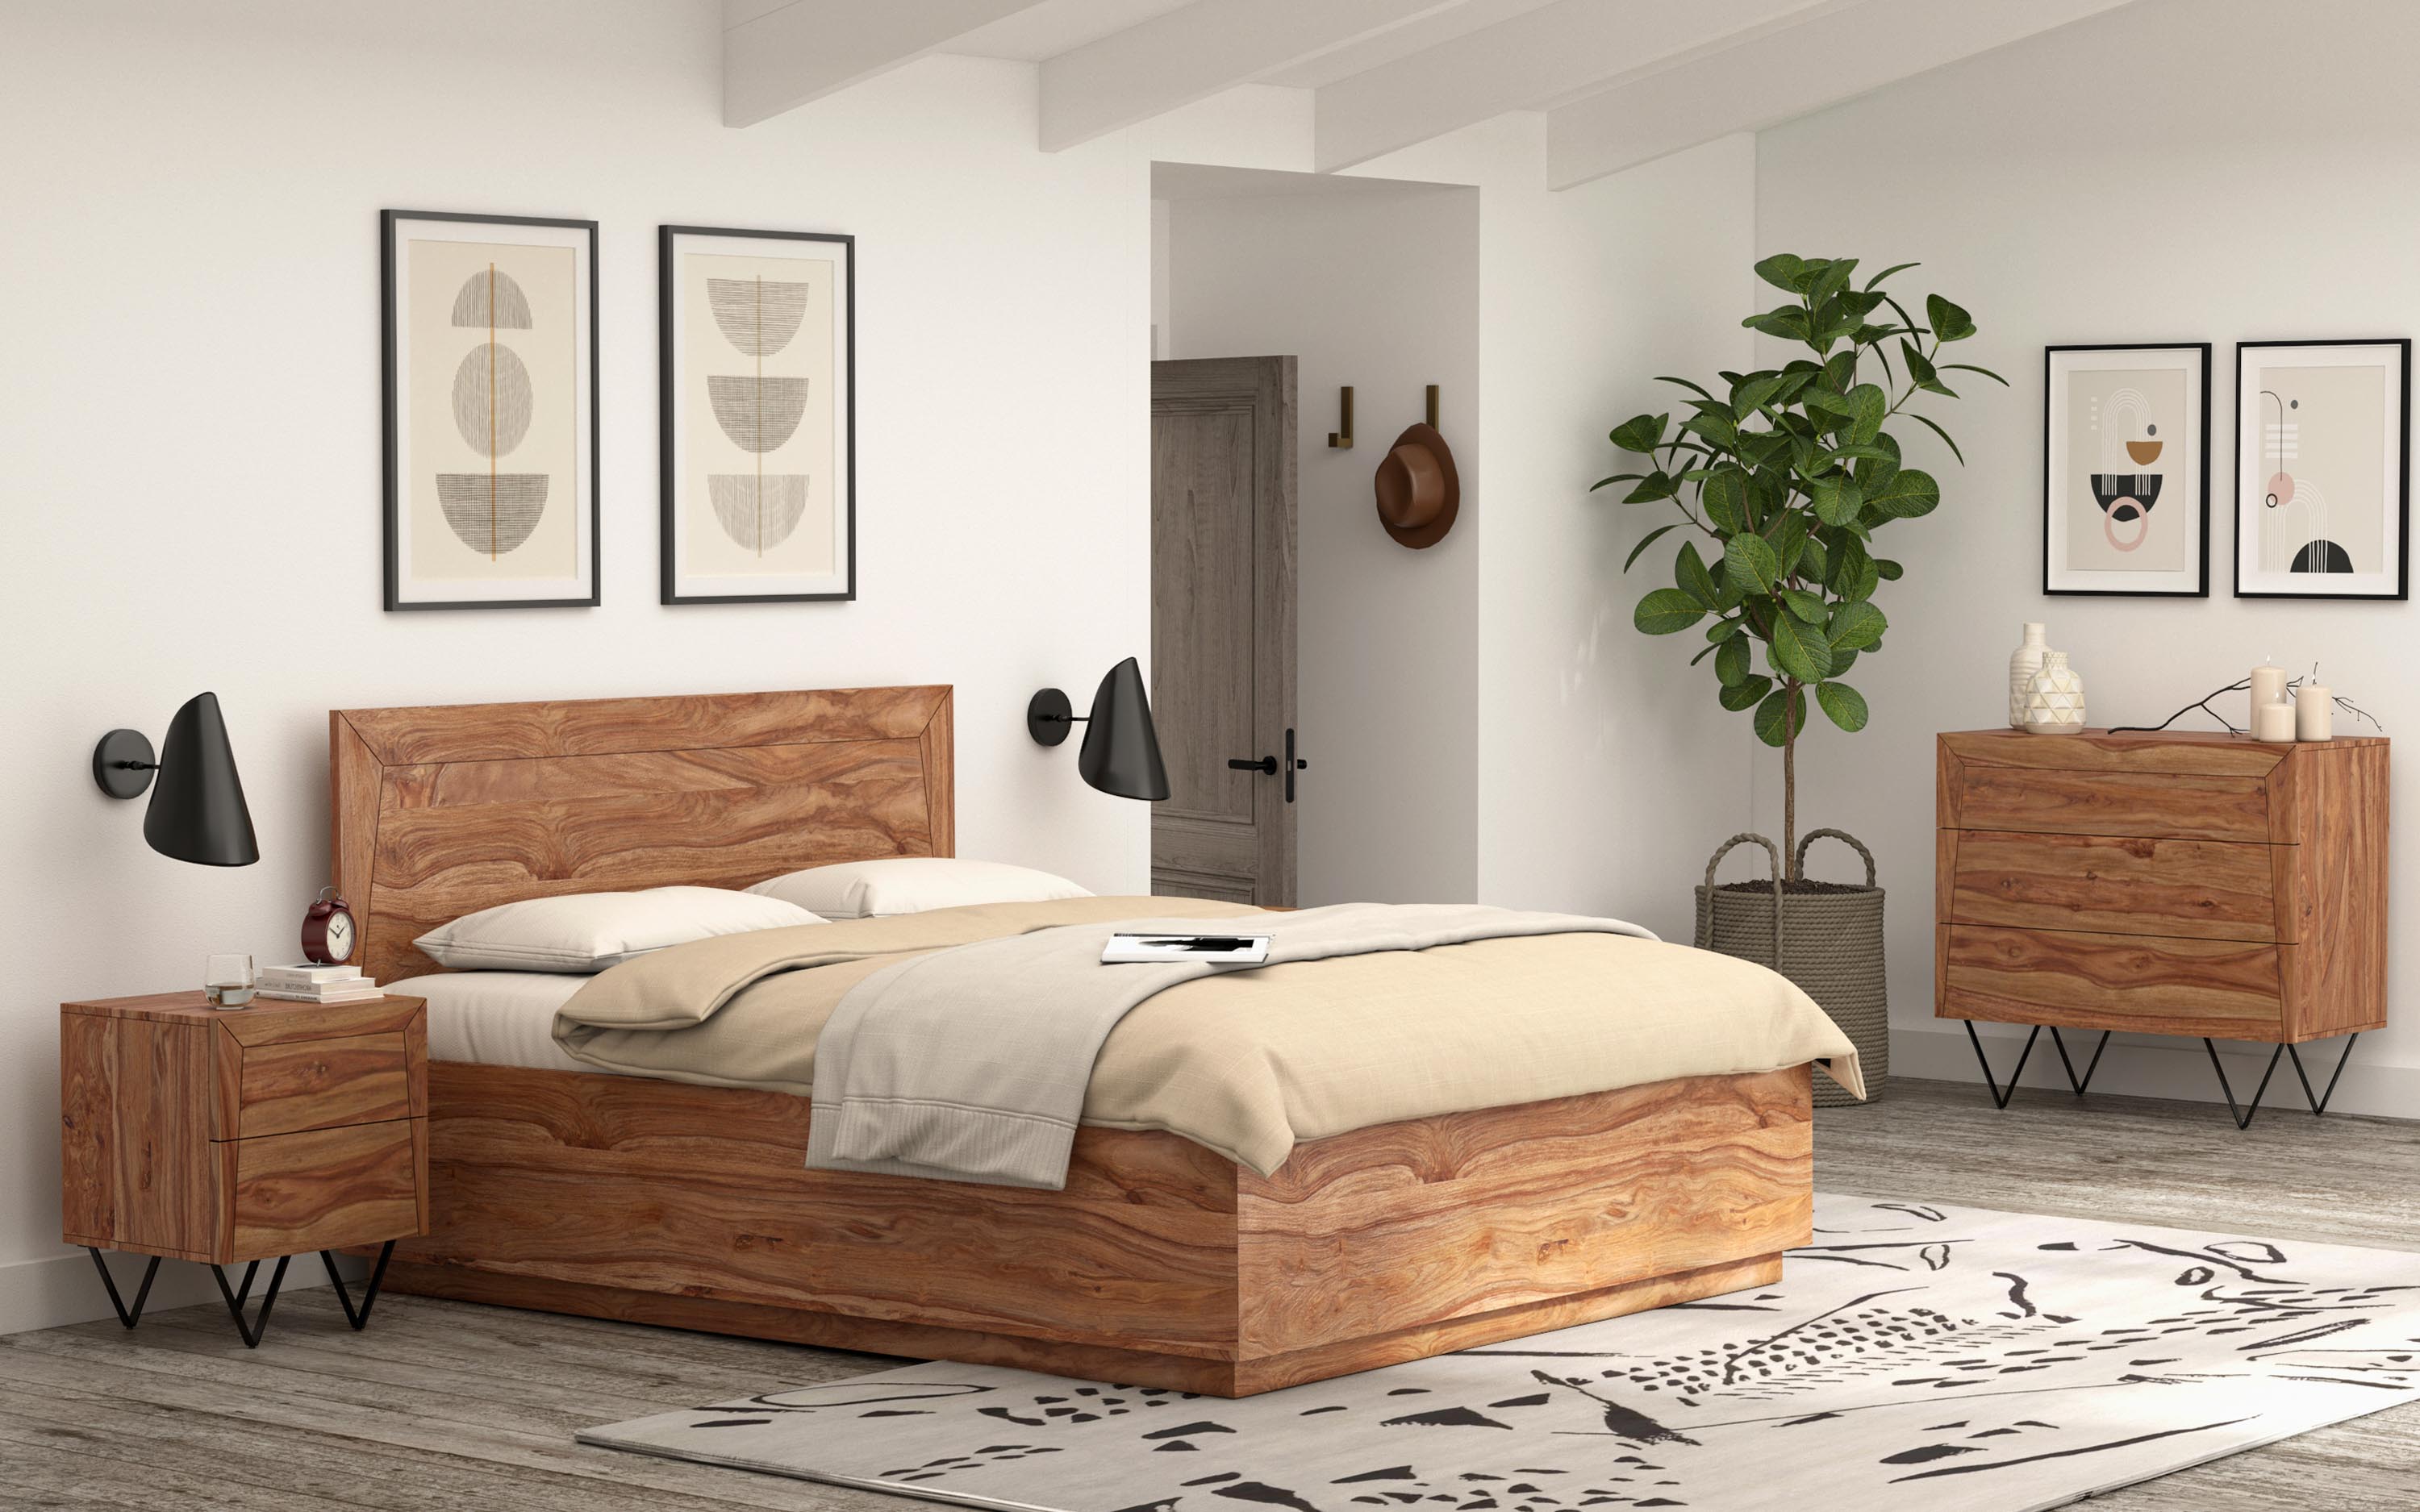 Elegant wood bed frame and nightstand in a luxury bedroom interior with minimalist decor